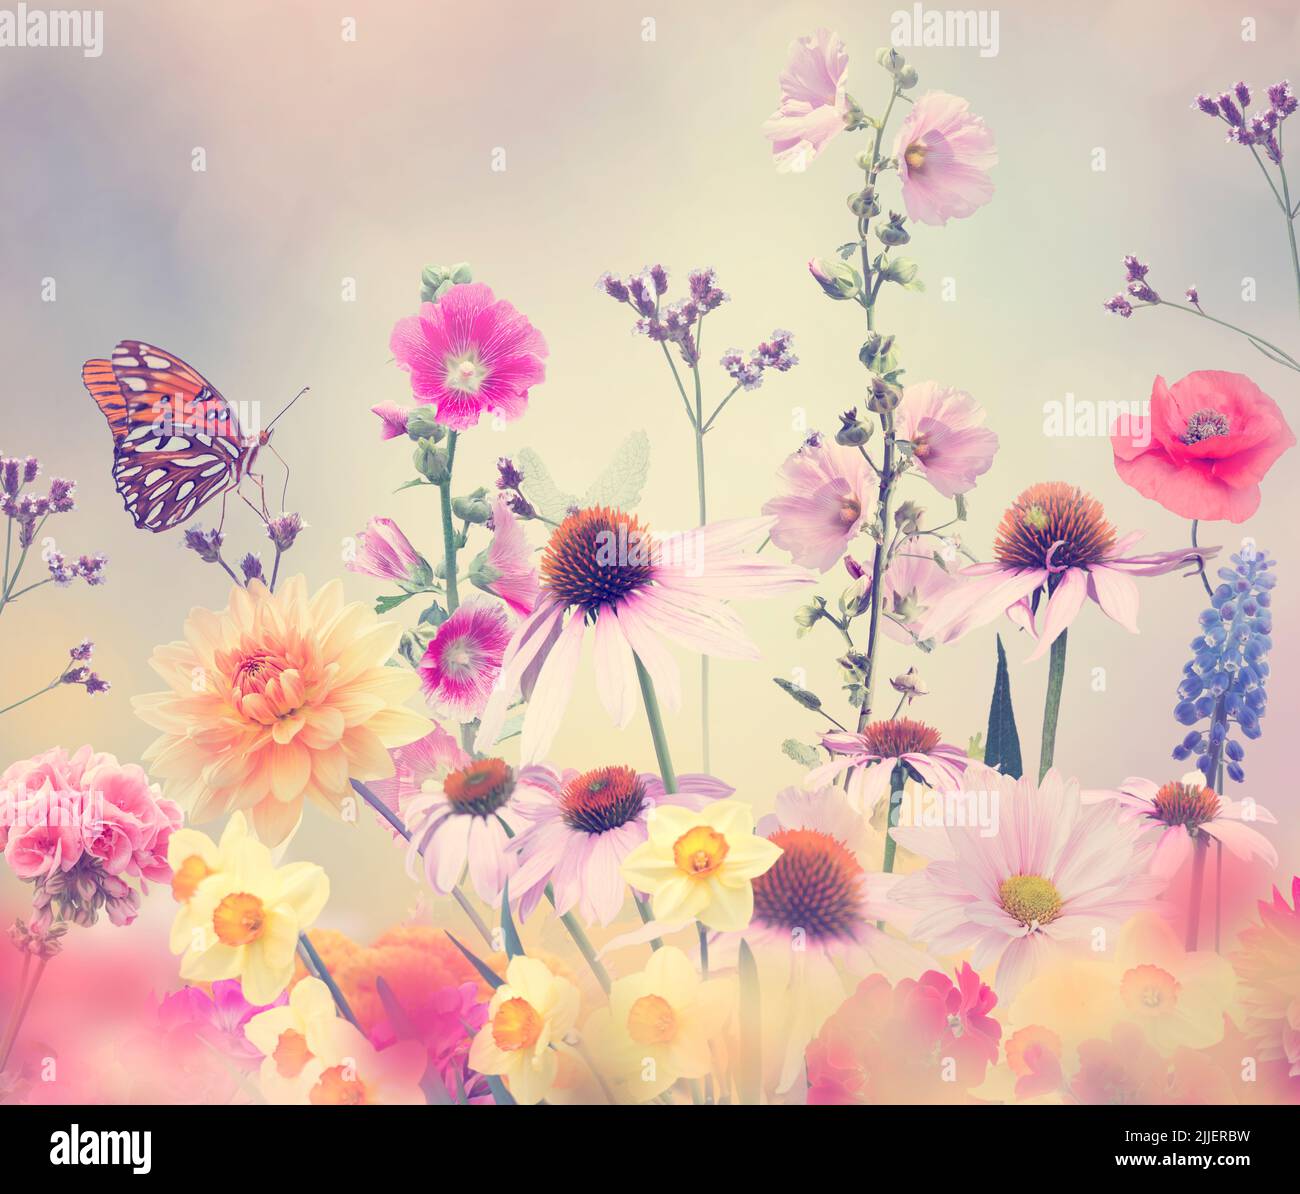 Variety of colorful flowers in the garden and butterfly Stock Photo